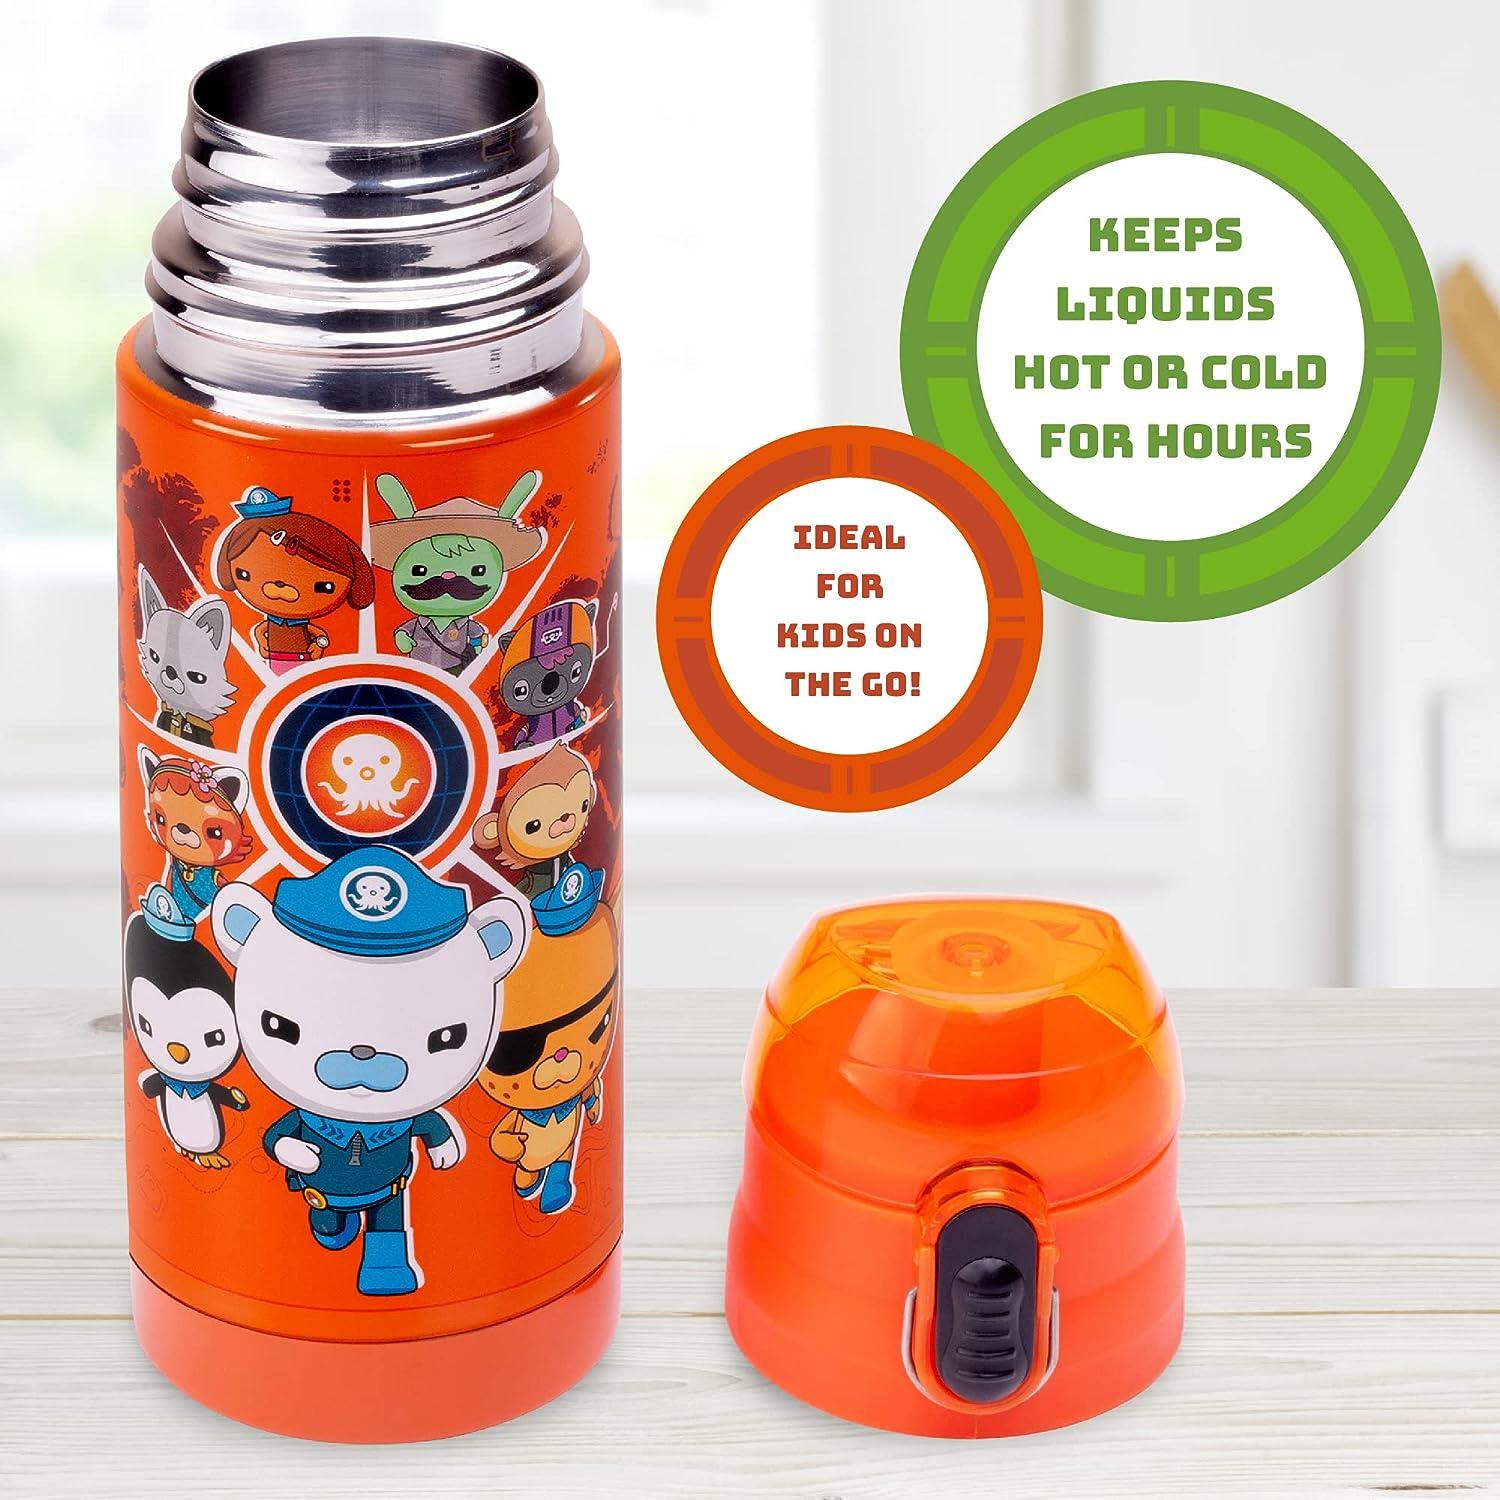 Octonauts Above & Beyond Orange Stainless Steel 13 oz Insulated Water Bottle  for Kids - Spill Proof Lid Easy to Use Reusable - Keep Liquids Hot/Cold For  Hours -Perfect for Travel School